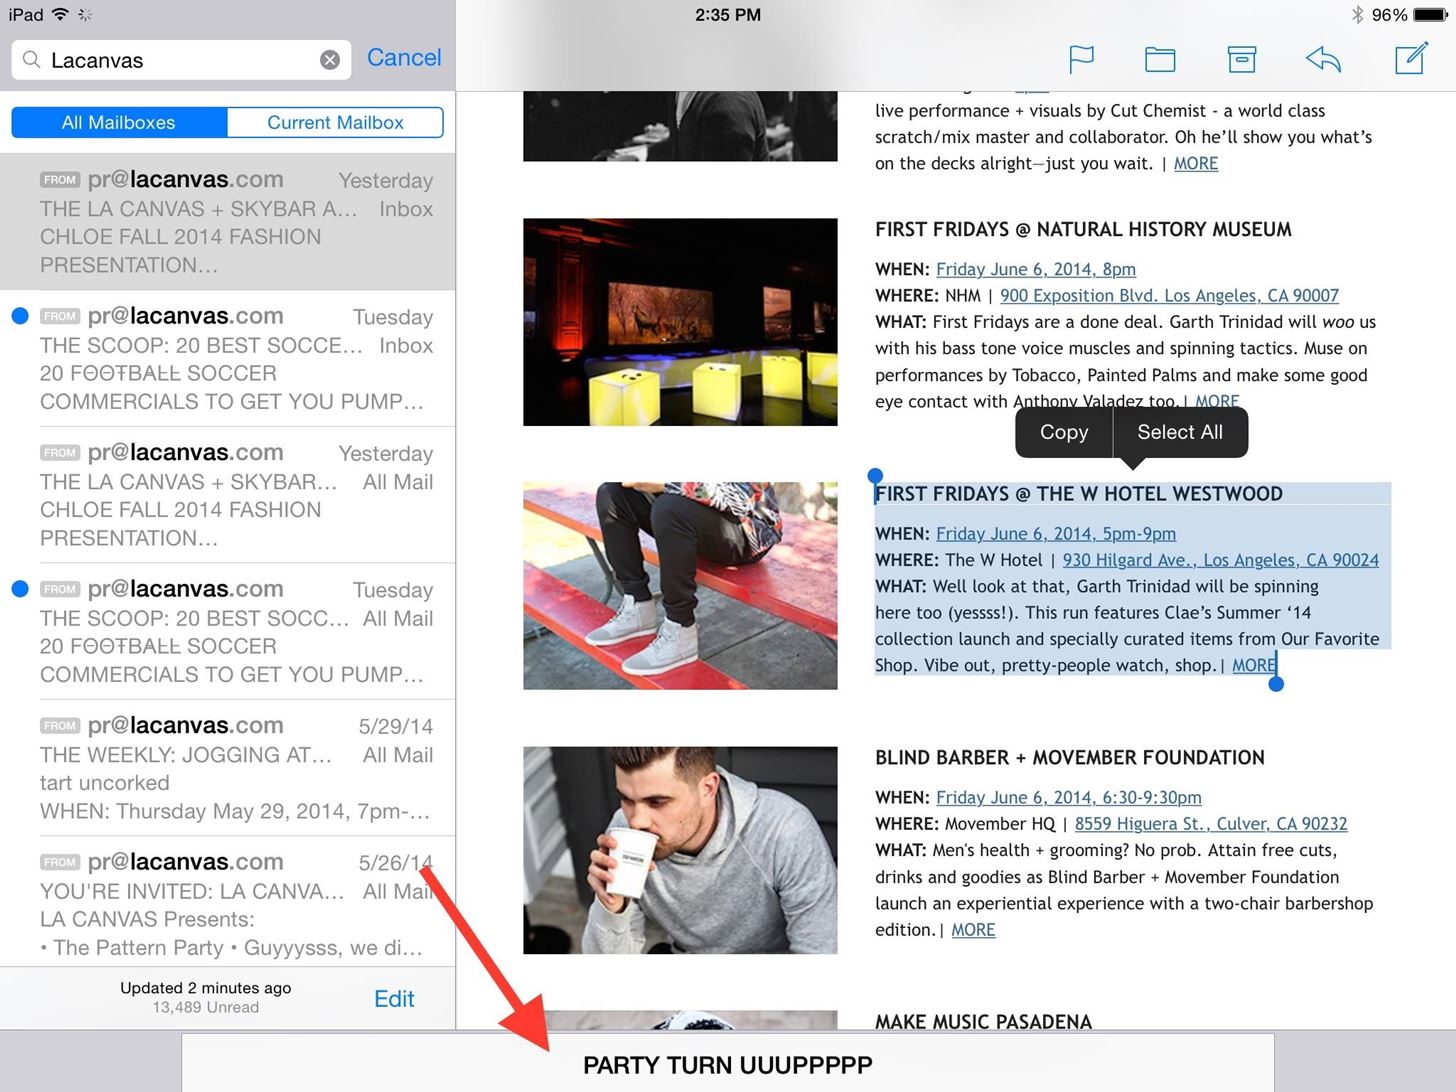 How to Minimize Email Drafts into Tabs on Your iPhone or iPad for Faster Access Later